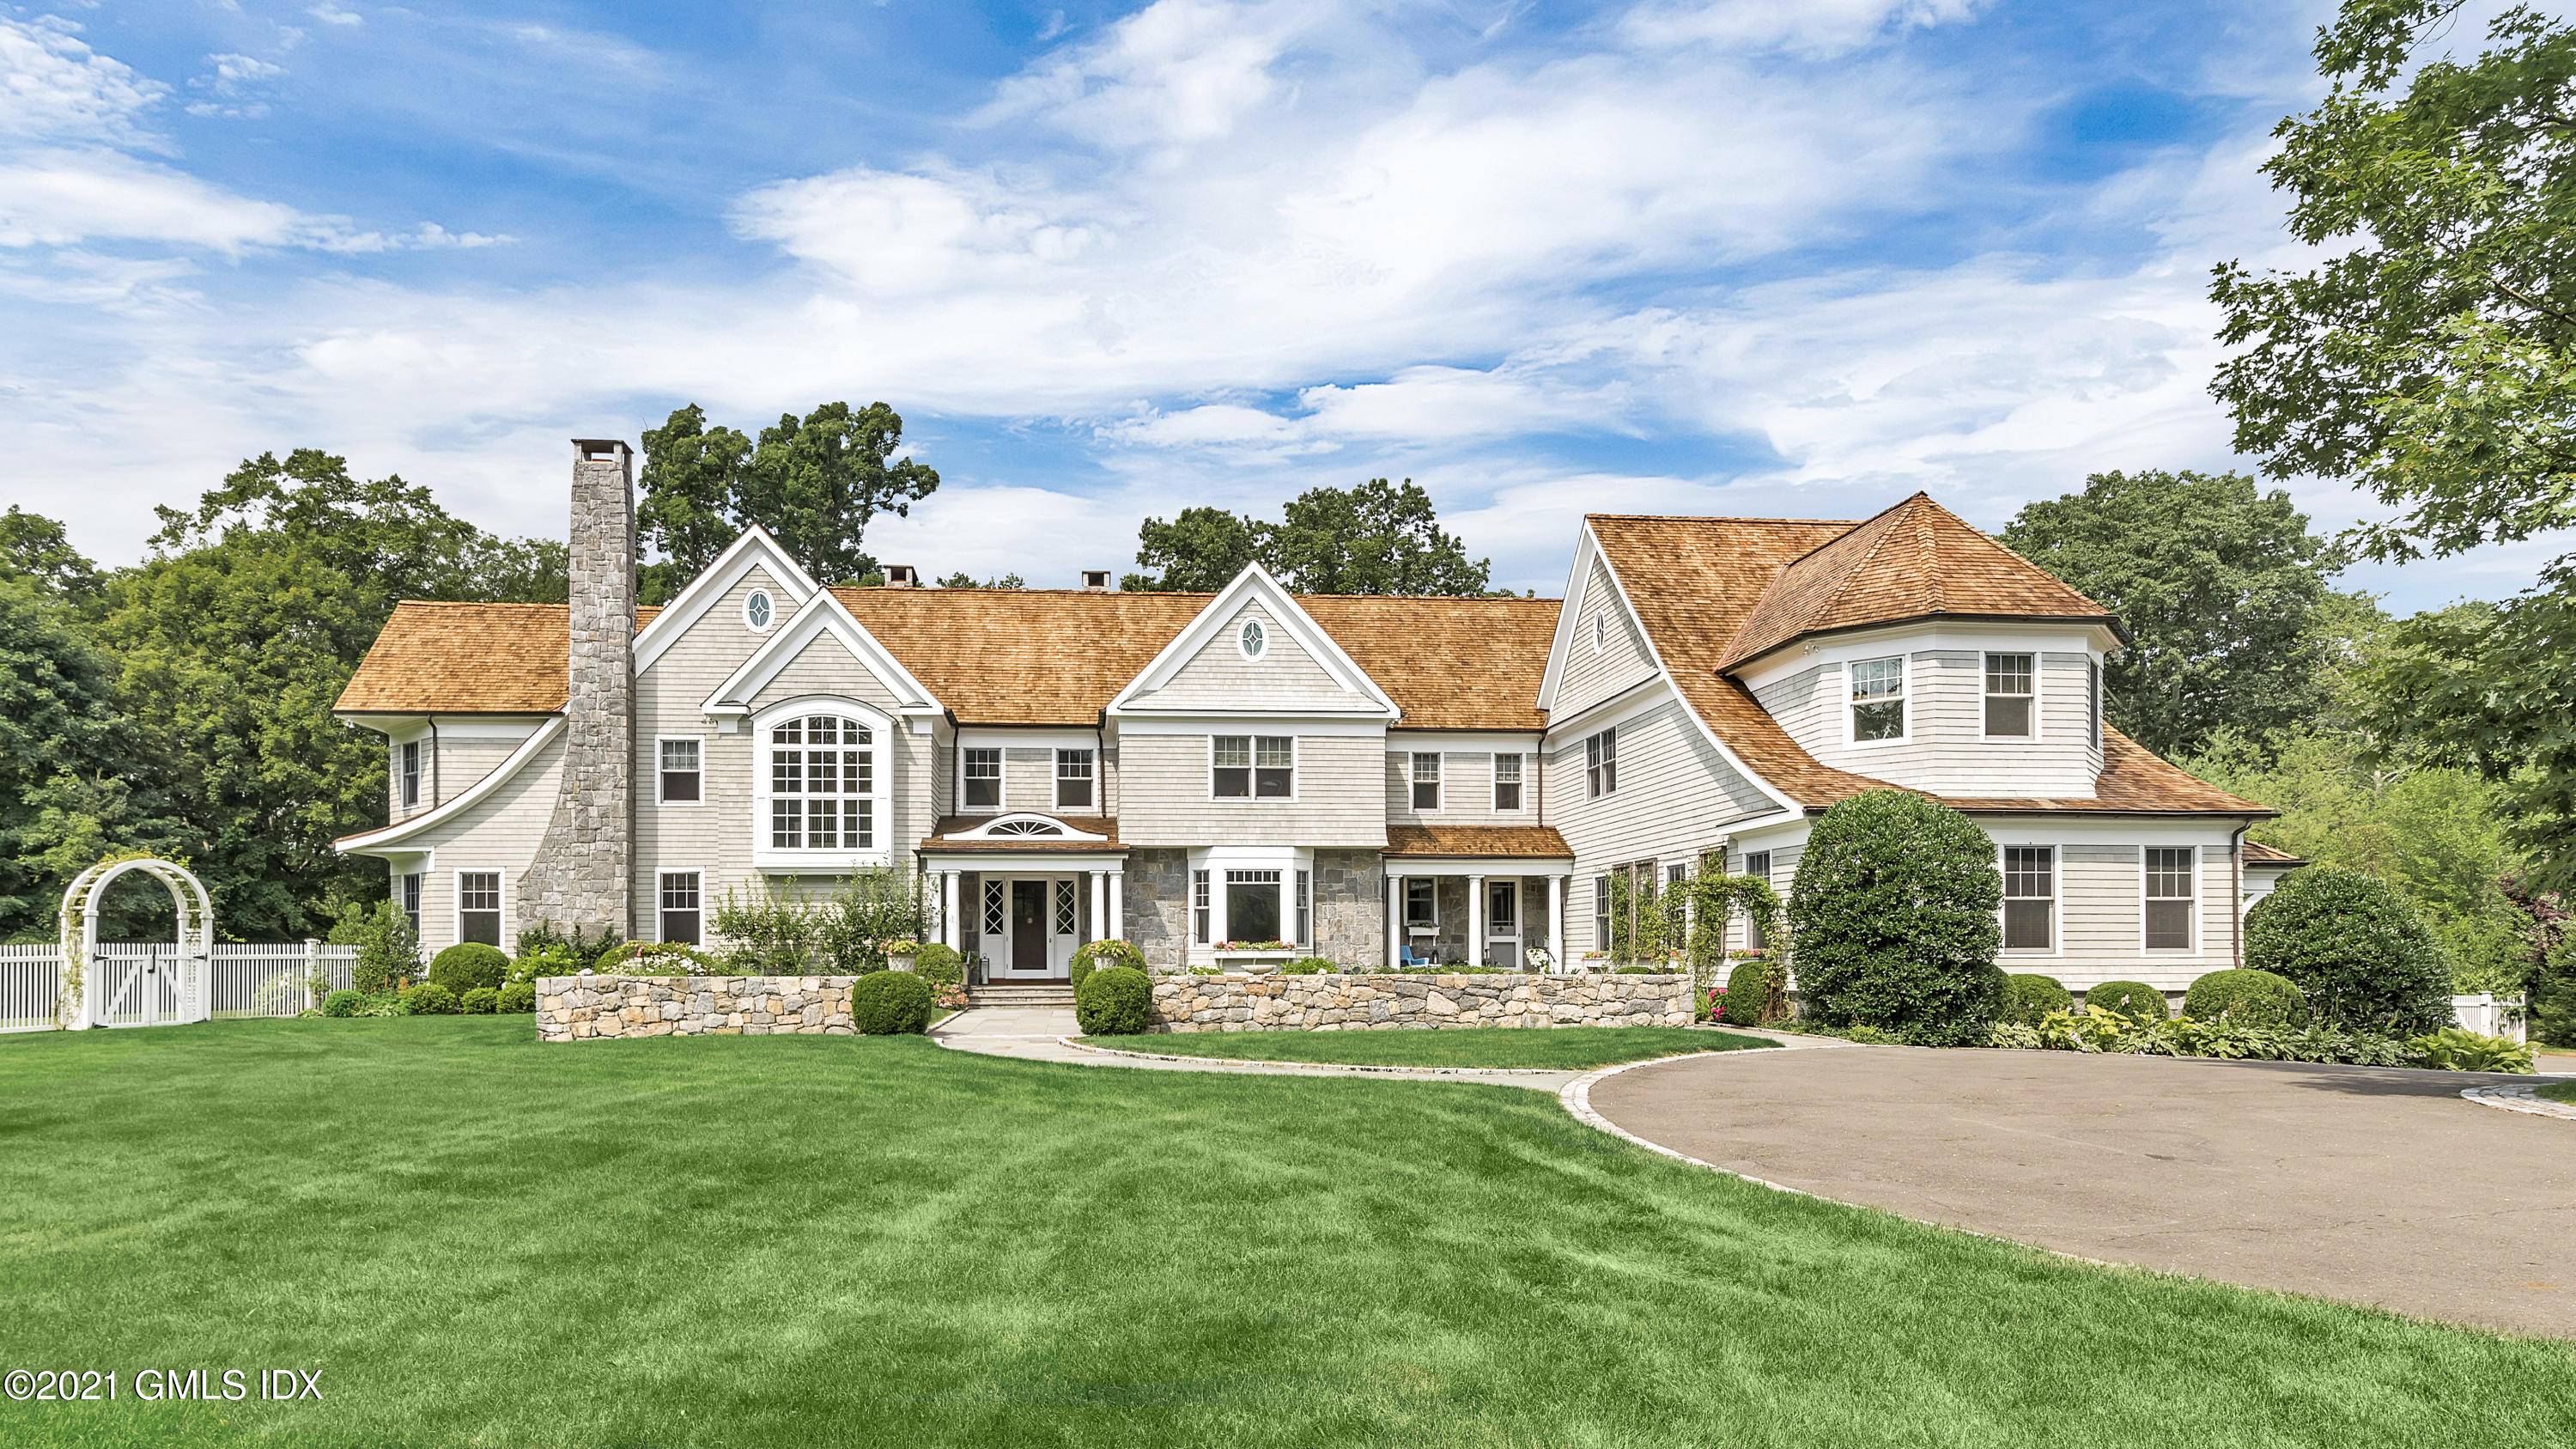 Classic Shingle Style Home beautifully sited on 2.